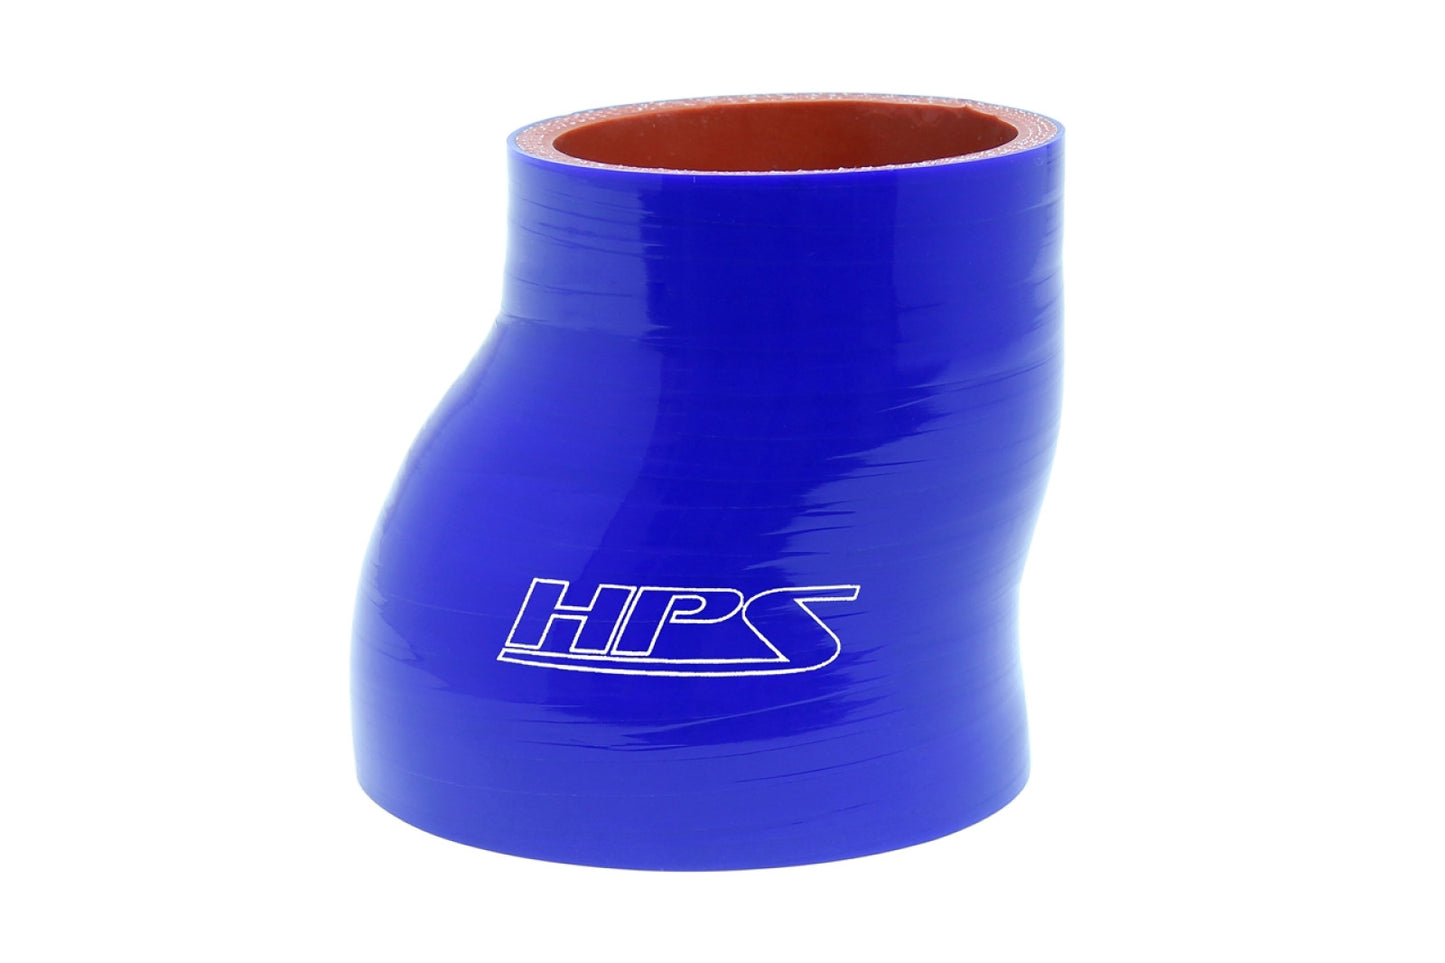 HPS 2.5" - 3" ID , 3" Long High Temp 4-ply Reinforced Silicone Offset Reducer Coupler Hose Blue (63mm - 76mm ID , 76mm Length)